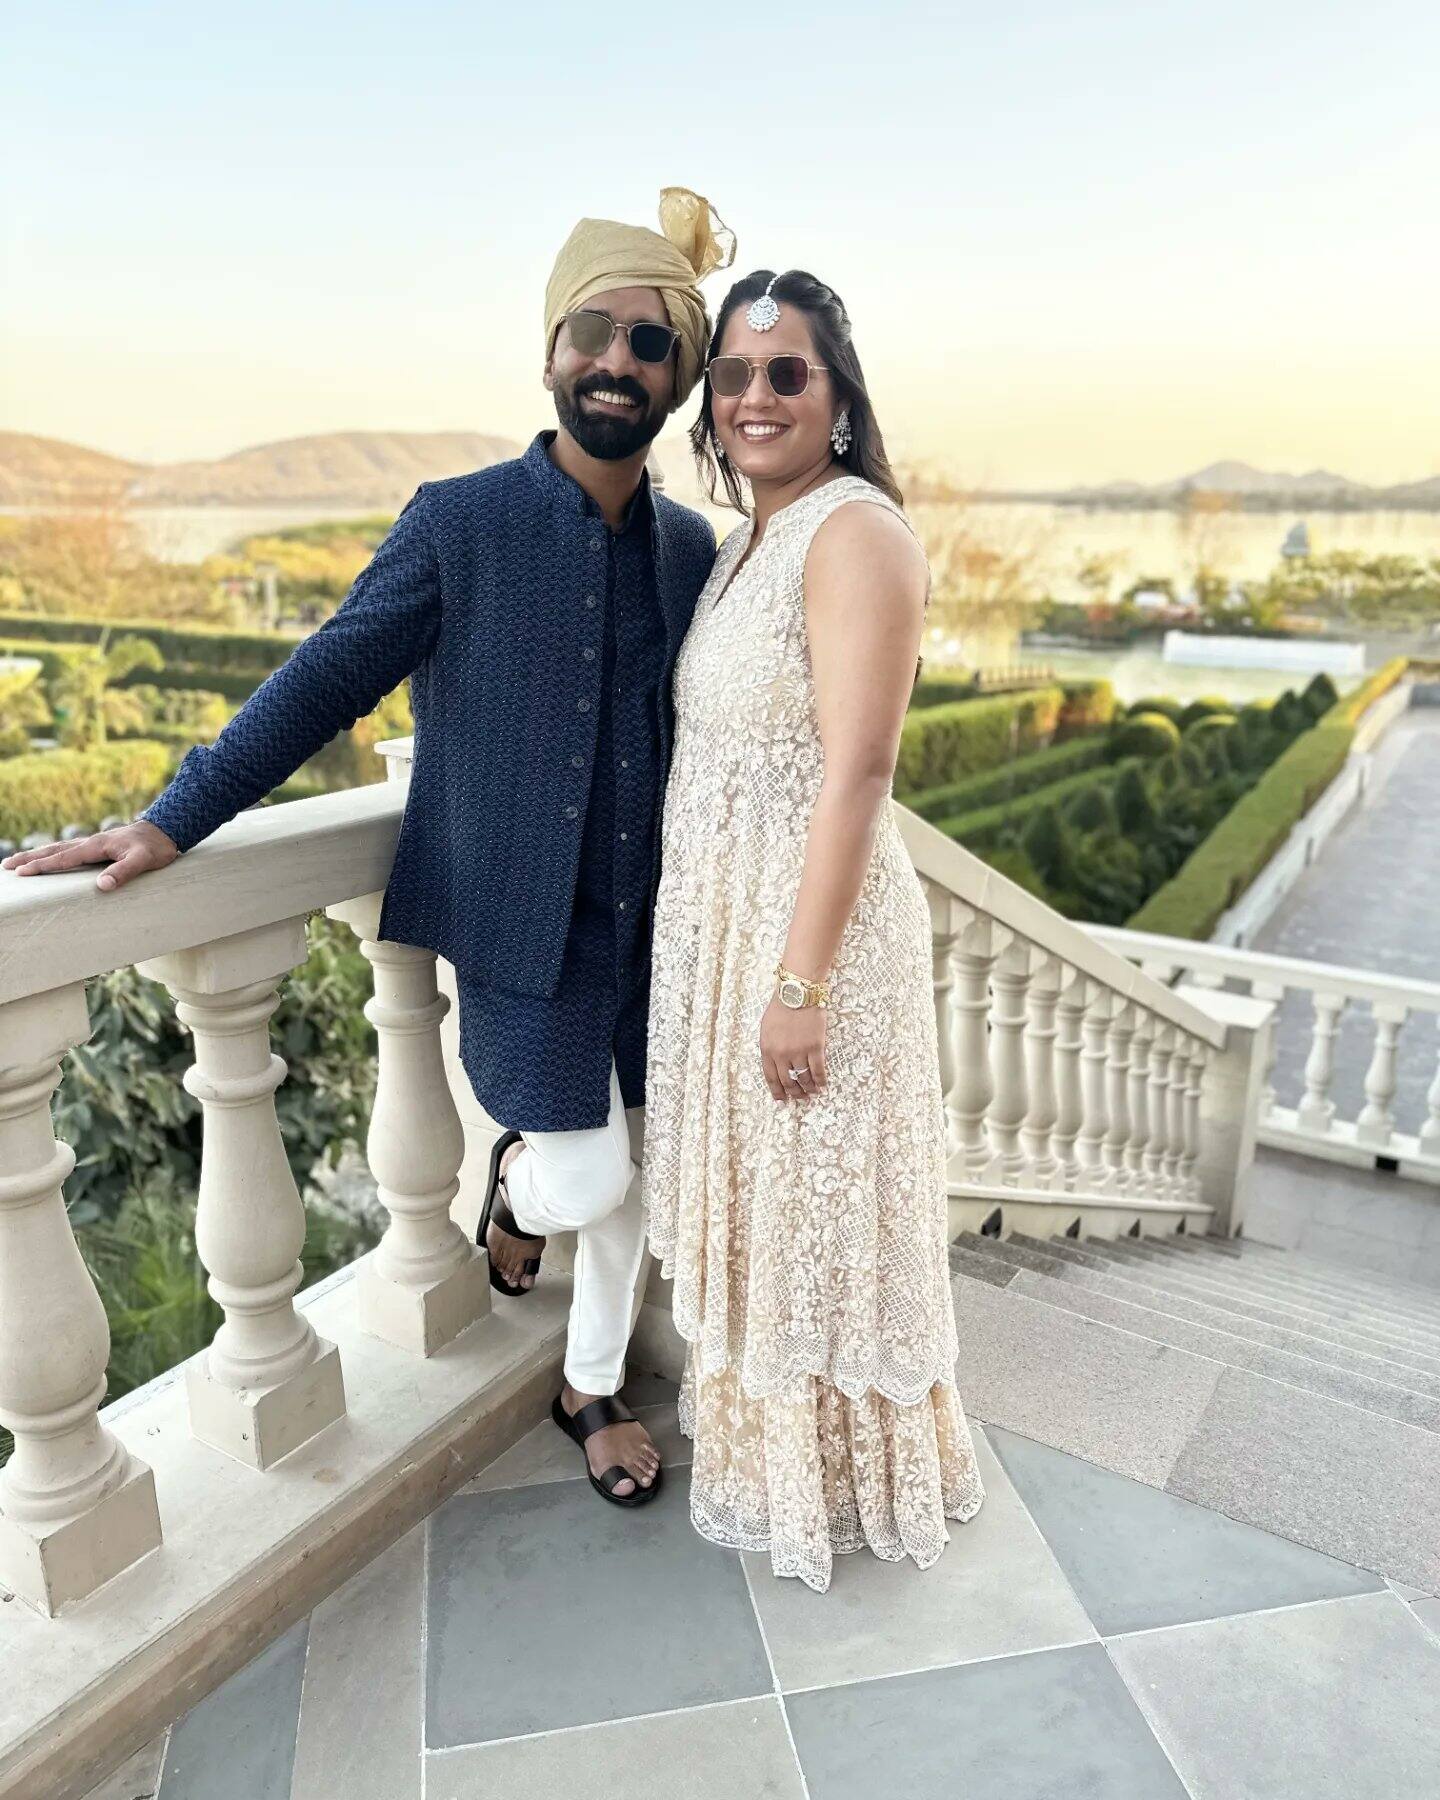 Dipika Pallikal - Here's presenting the newly married the... | Facebook